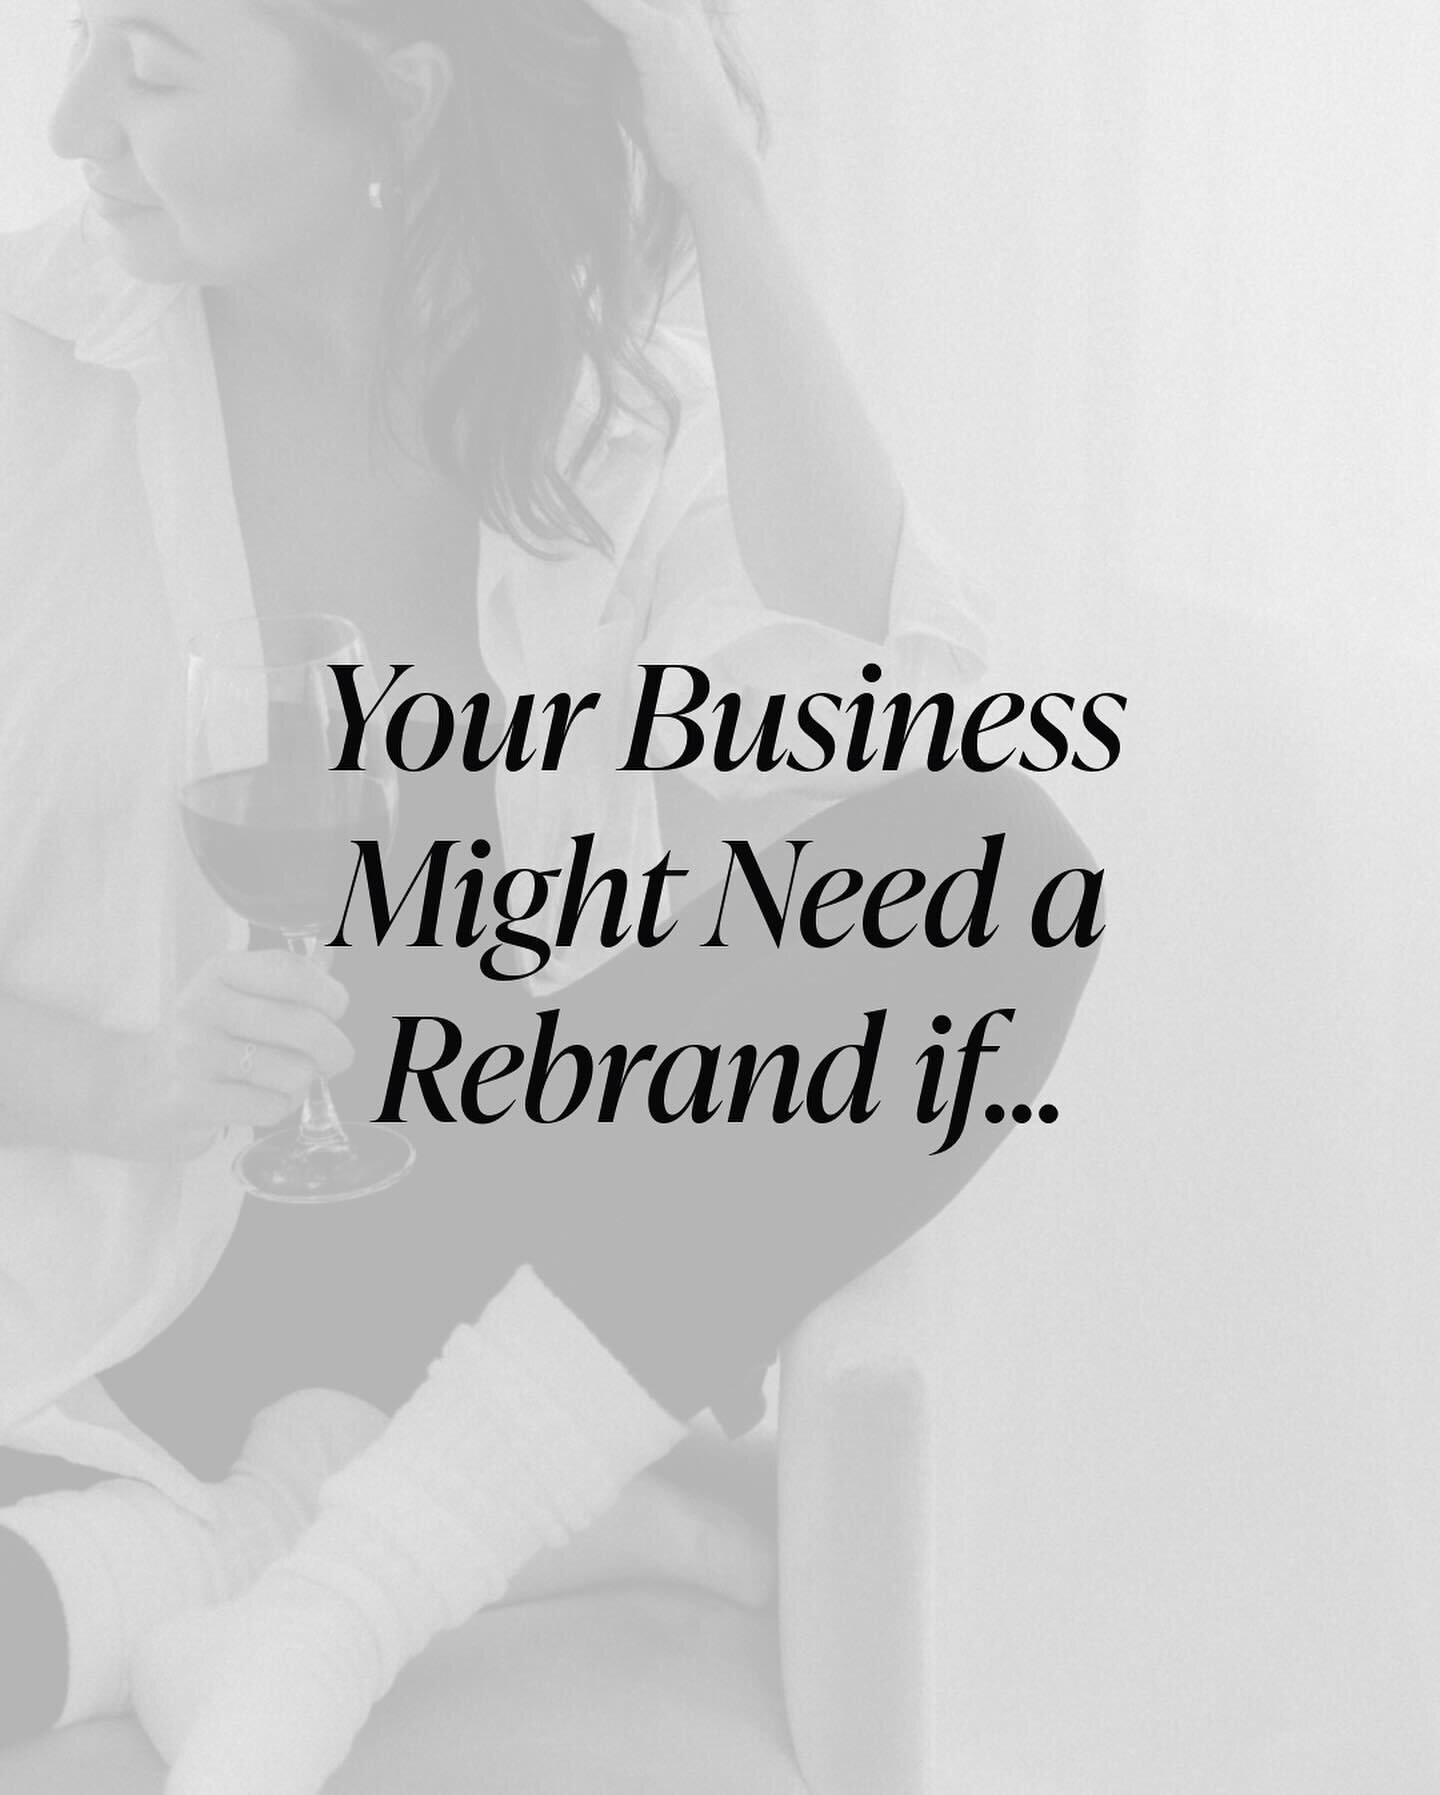 The tell-all signs that&rsquo;s your business needs a rebrand 👀

Sometimes it&rsquo;s easier to avoid these harsh truths and carry on, but the truth is that your DIY branding is actually holding your business back in more ways than you can think of.